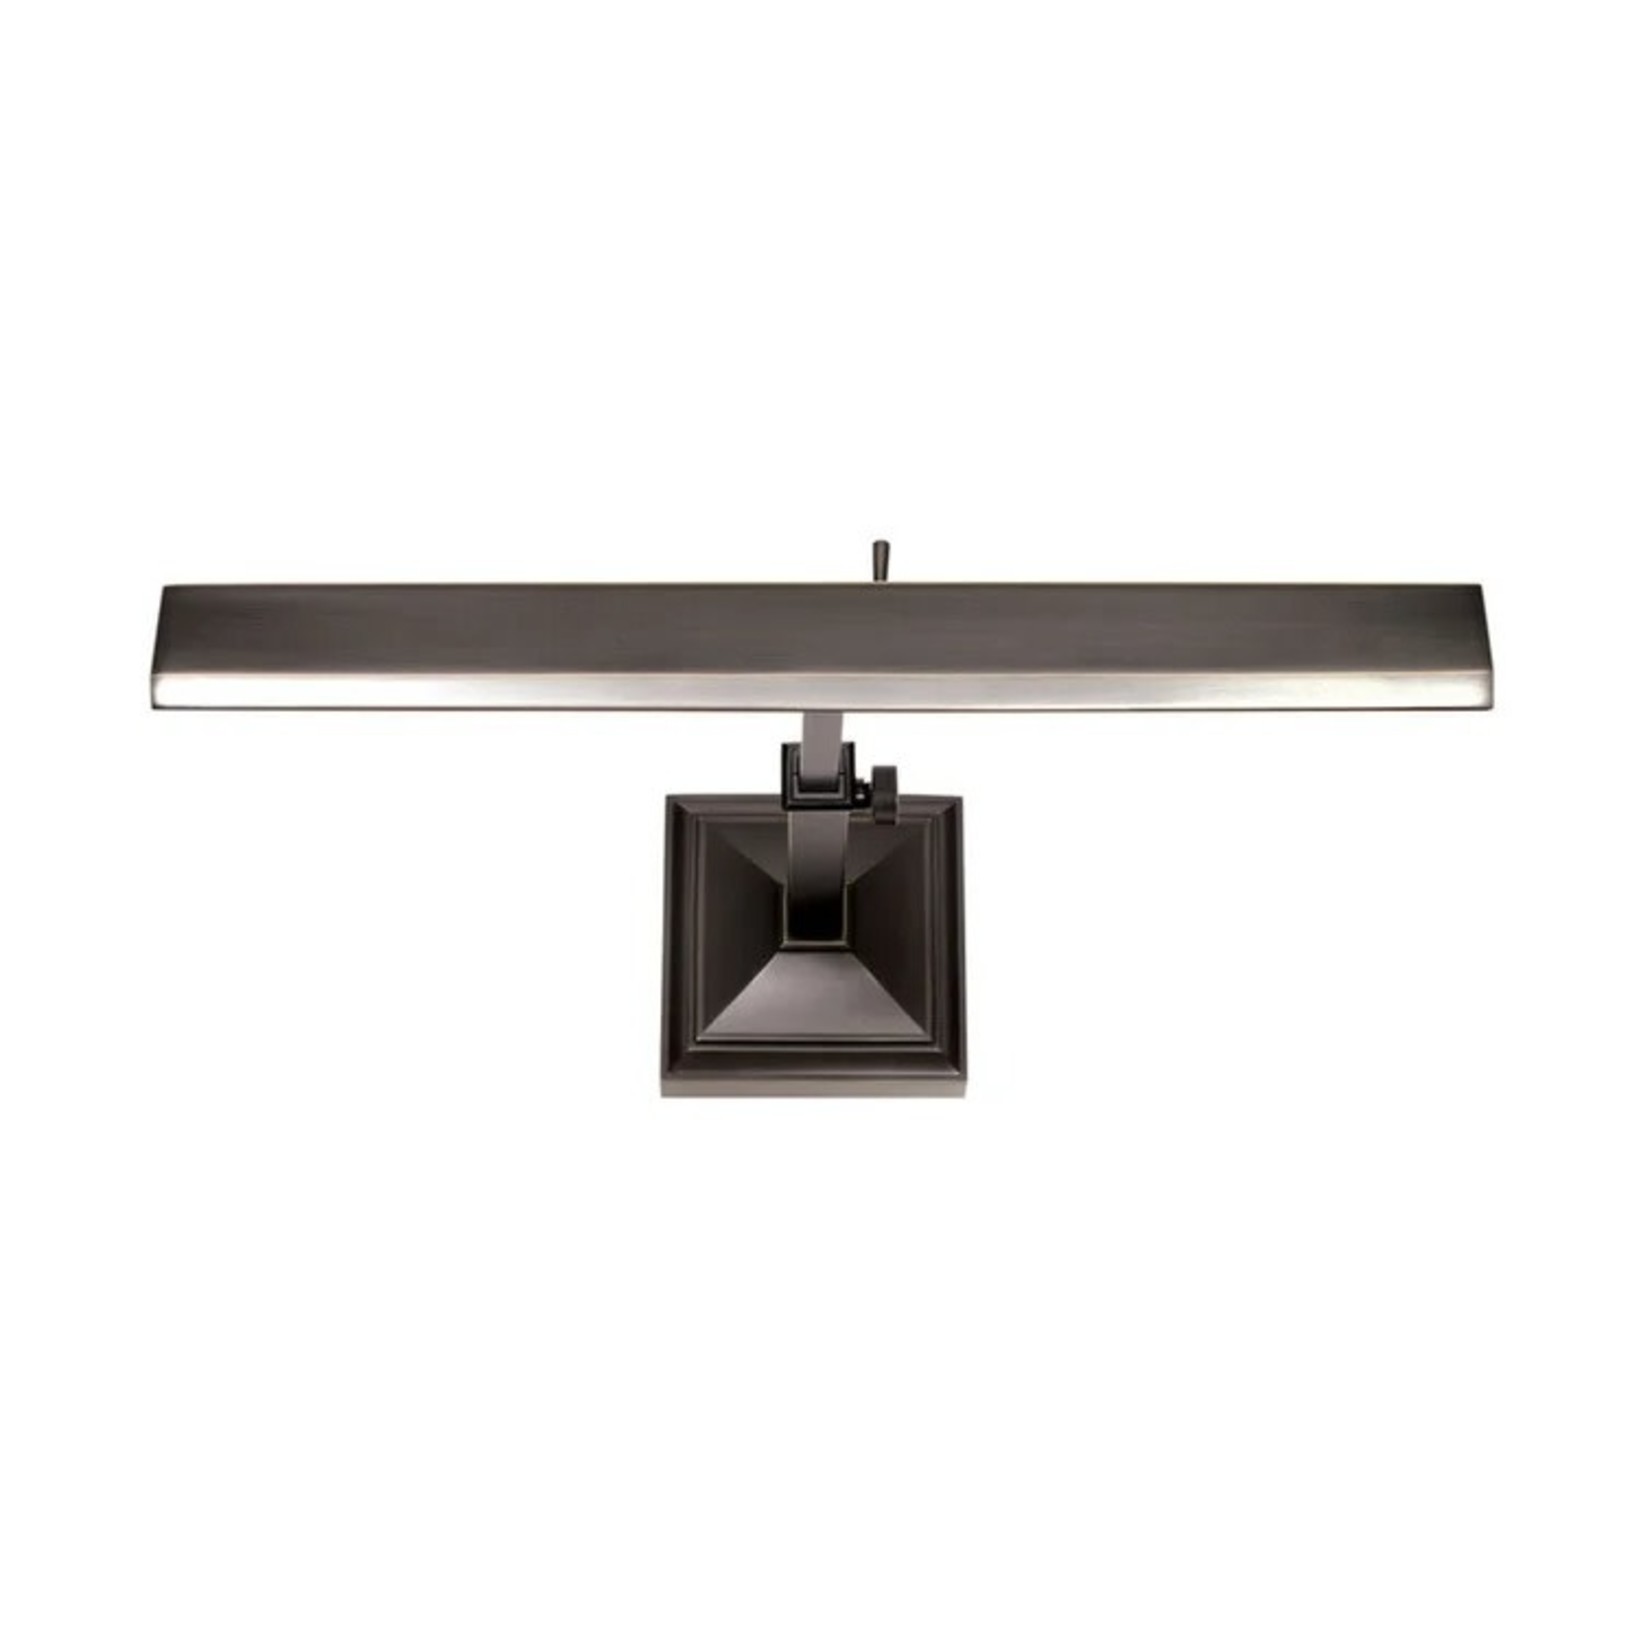 *27.75"Hemmingway Hardwired LED Wall Mounted Picture Light - Rubbed Bronze - Final Sale